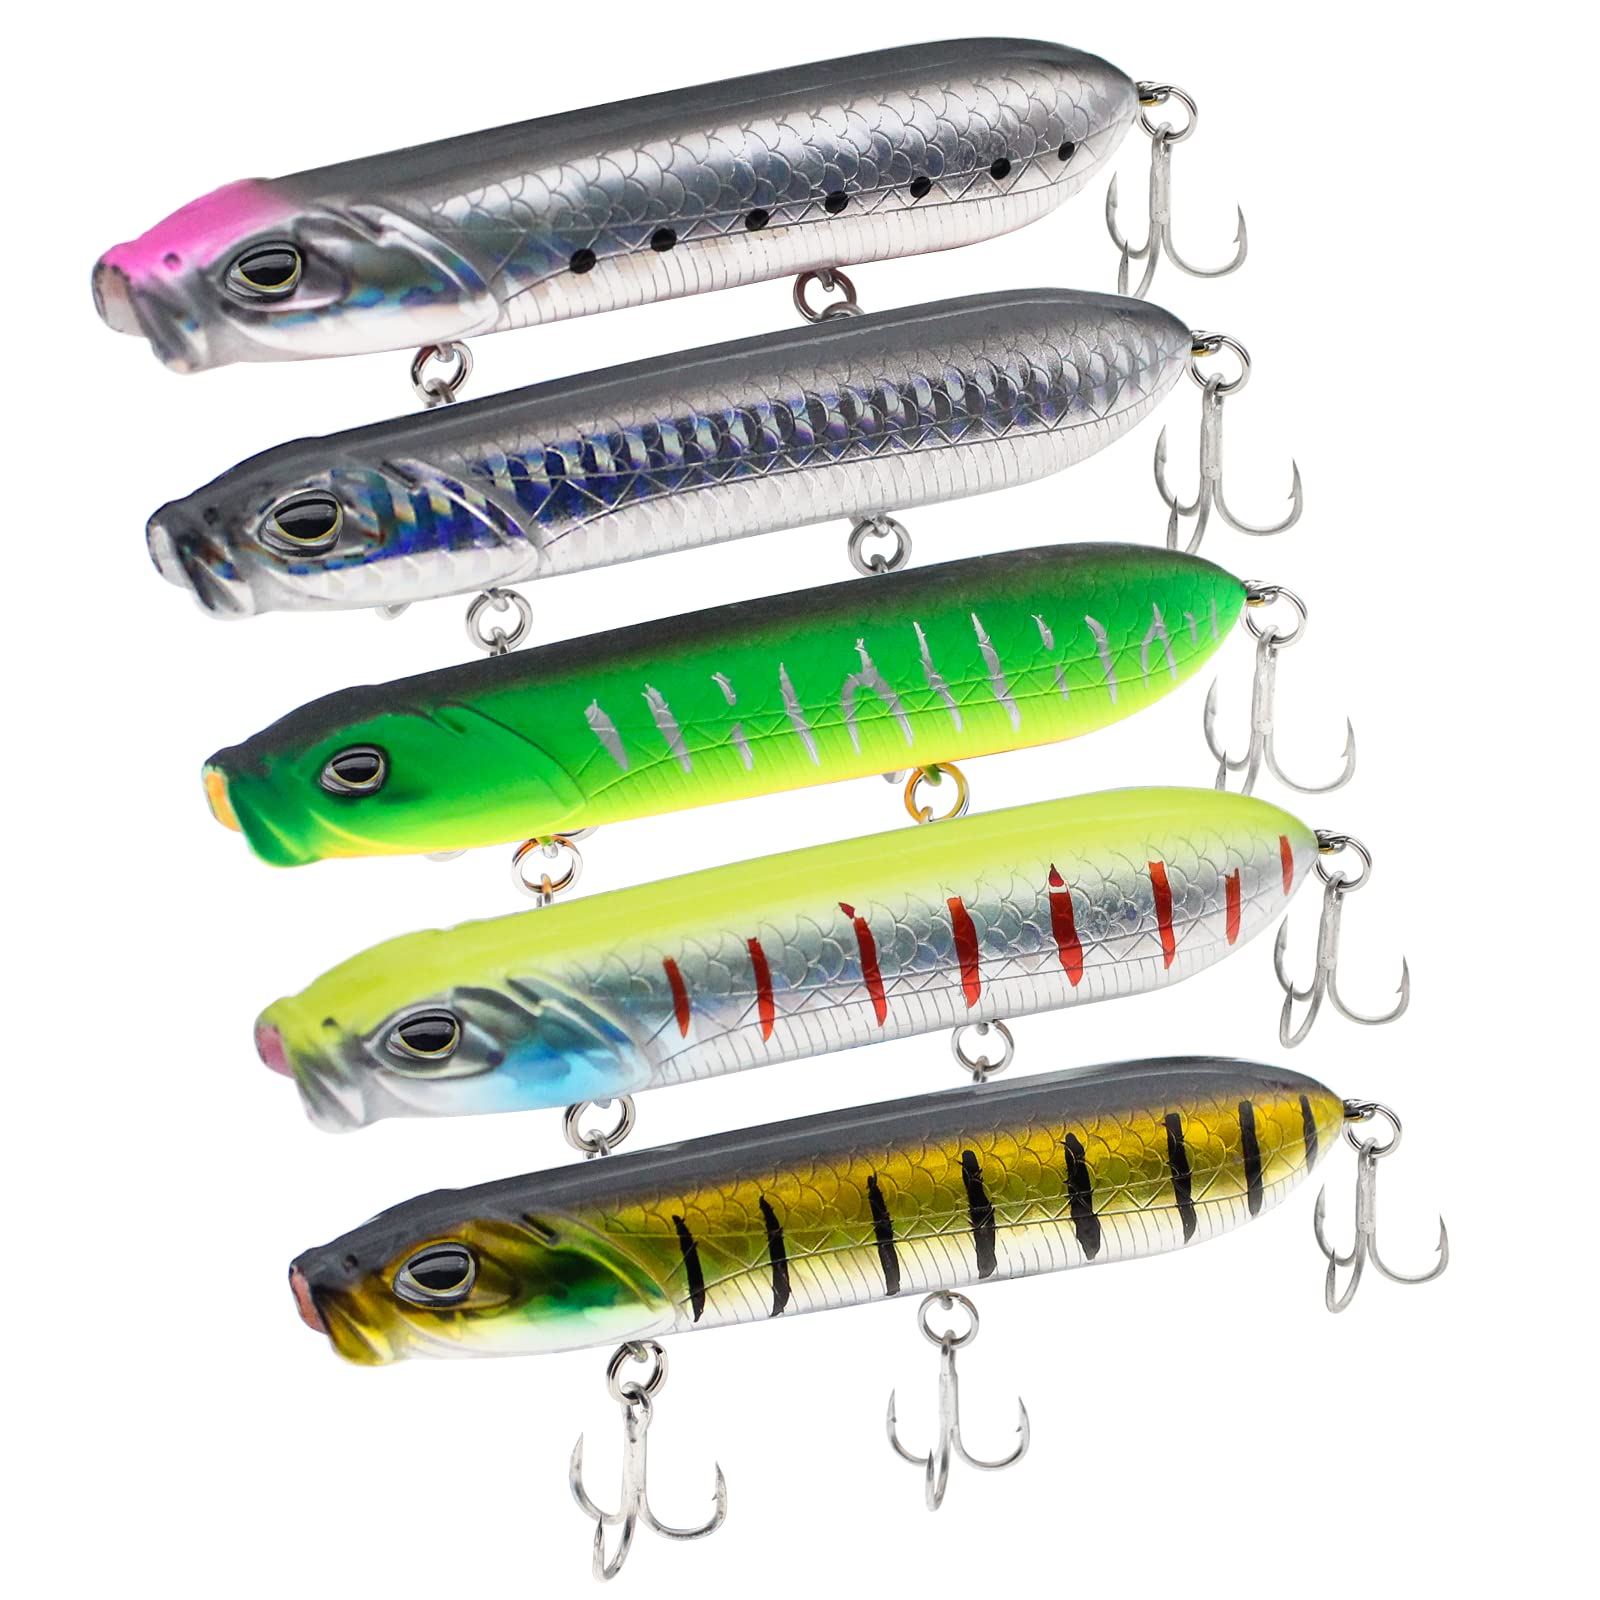 Fishing Lures with VMC Hooks, Ultralight Crankbait Lures for Bass Perch  Walleye Trout Pike, Slow Sinking Mini Hard Baits, Freshwater or Saltwater